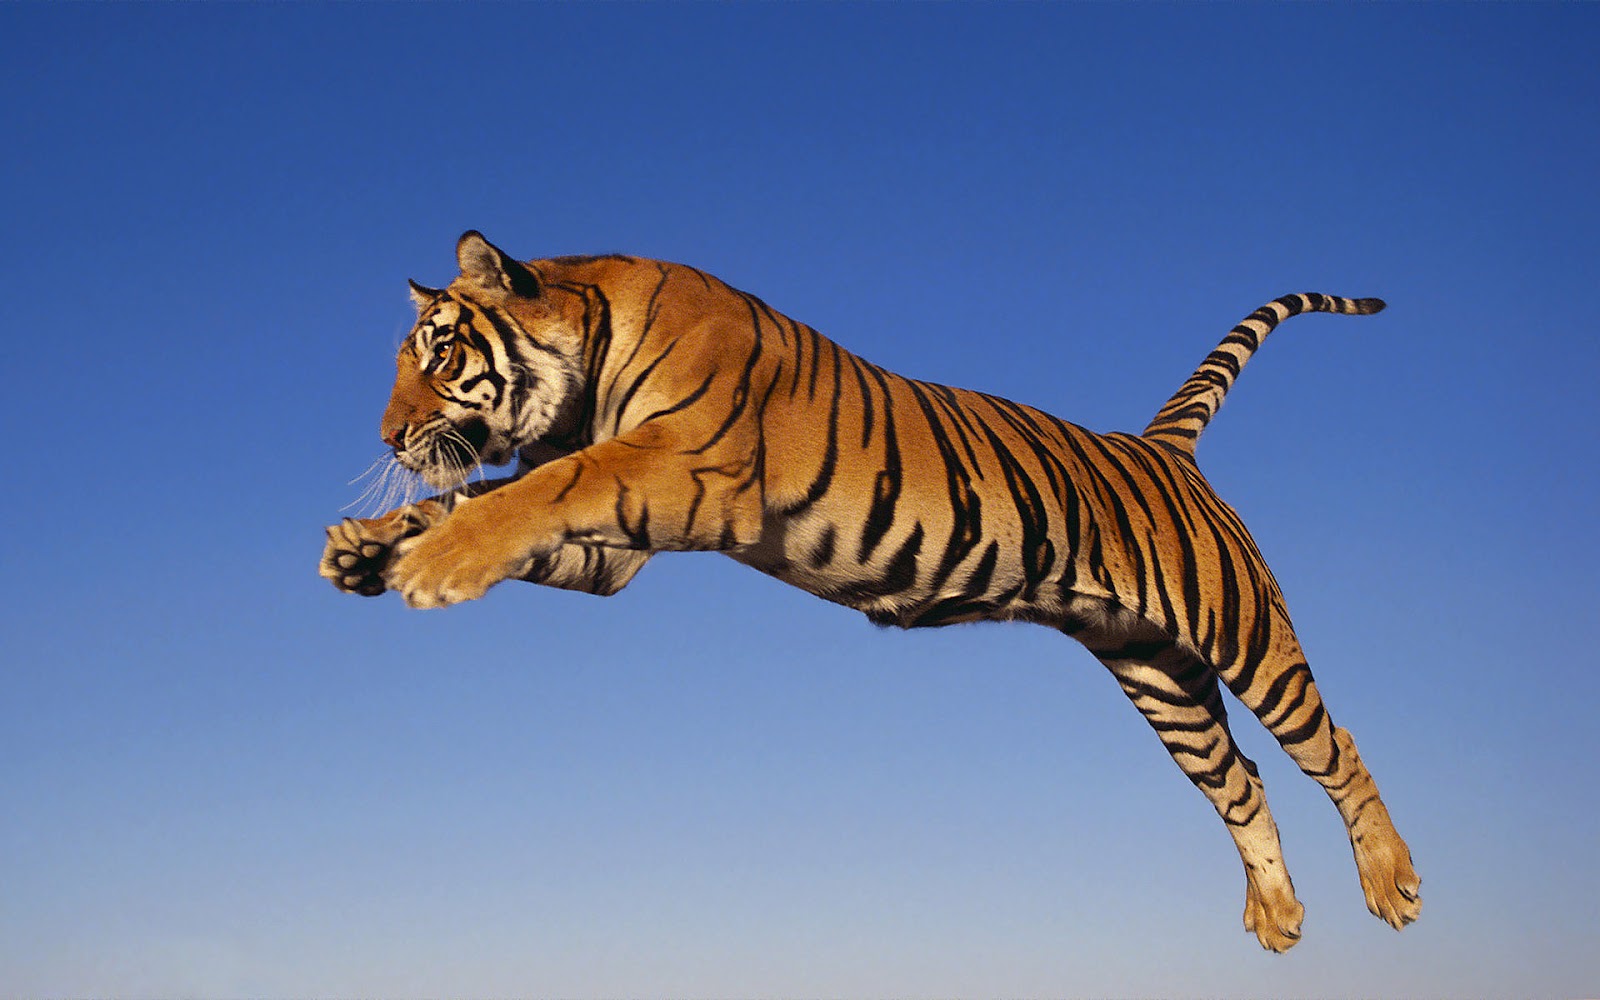 hd-tiger-wallpaper-with-a-jumping-and-attacking-tiger-wallpapers-backgrounds.jpg